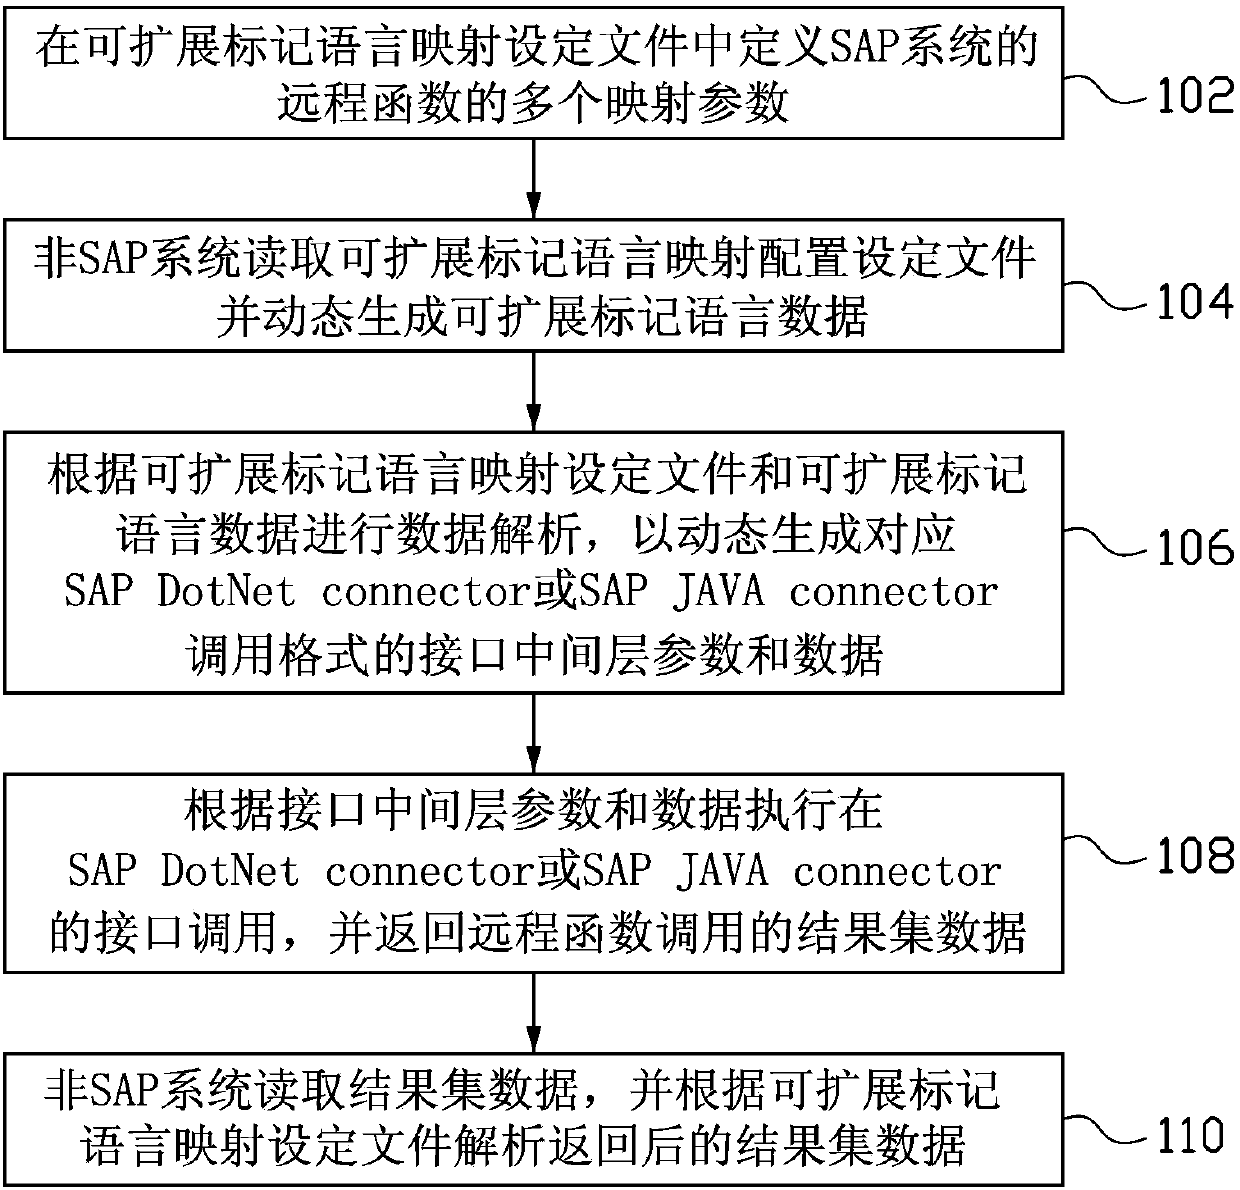 Method for developing intermediate layer of remote function call interface